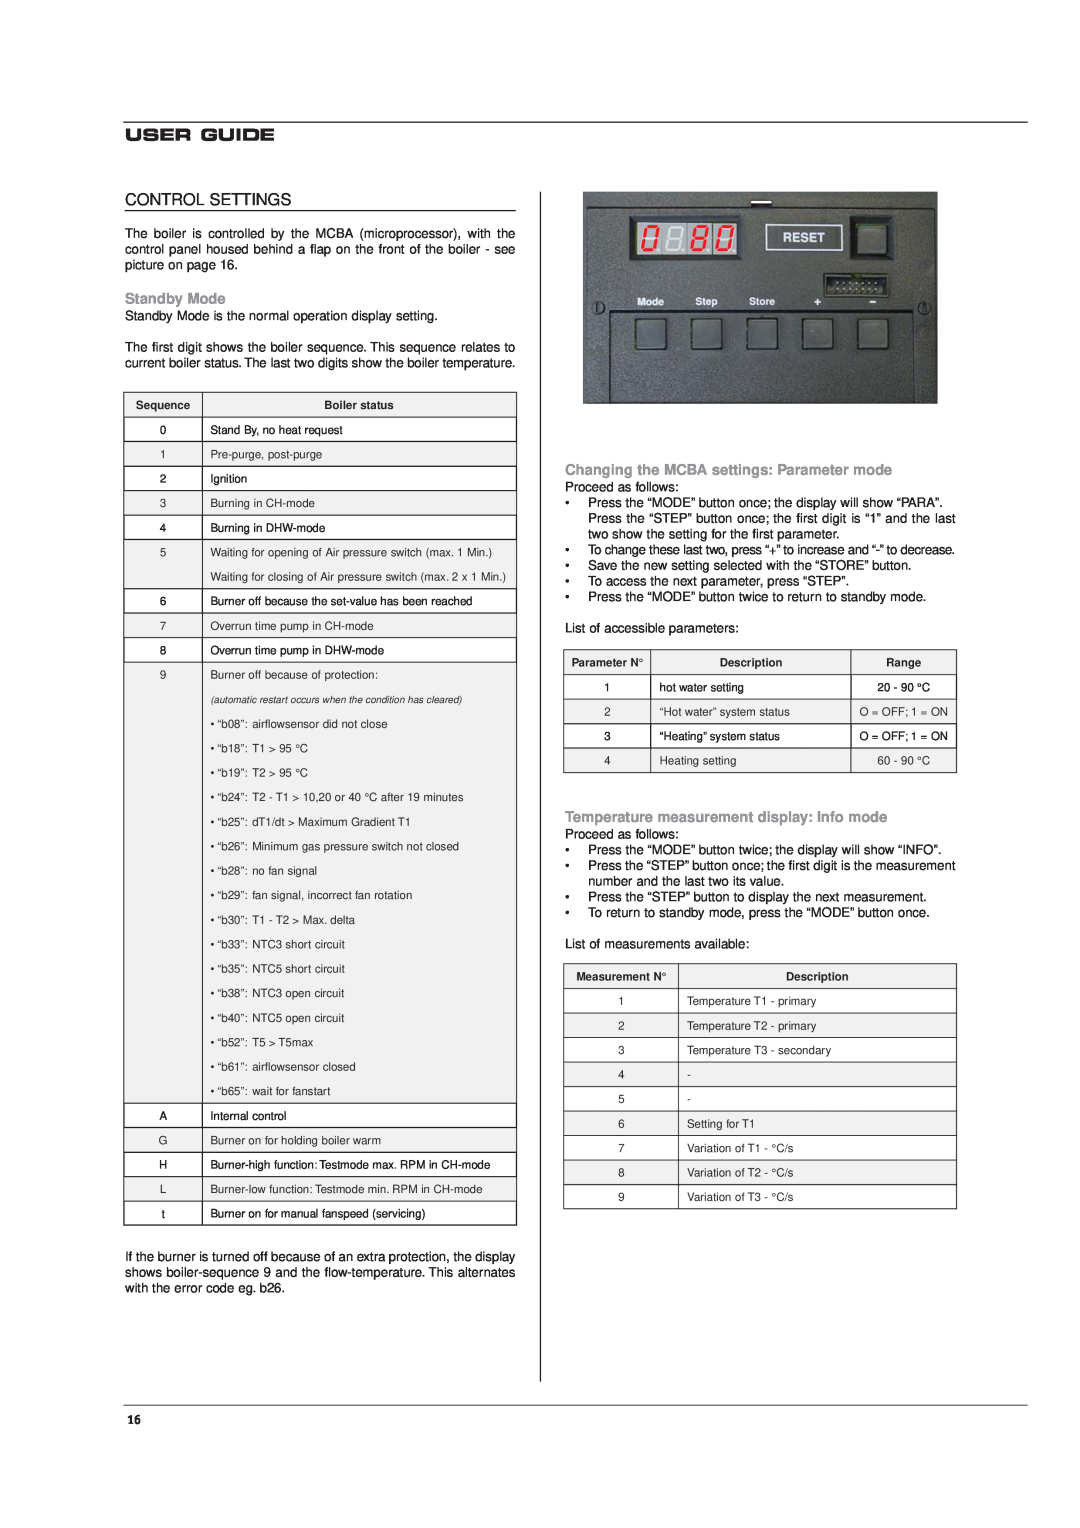 Casablanca Fan Company HM 71, HM 101 User Guide, Control Settings, Standby Mode, Changing the MCBA settings Parameter mode 